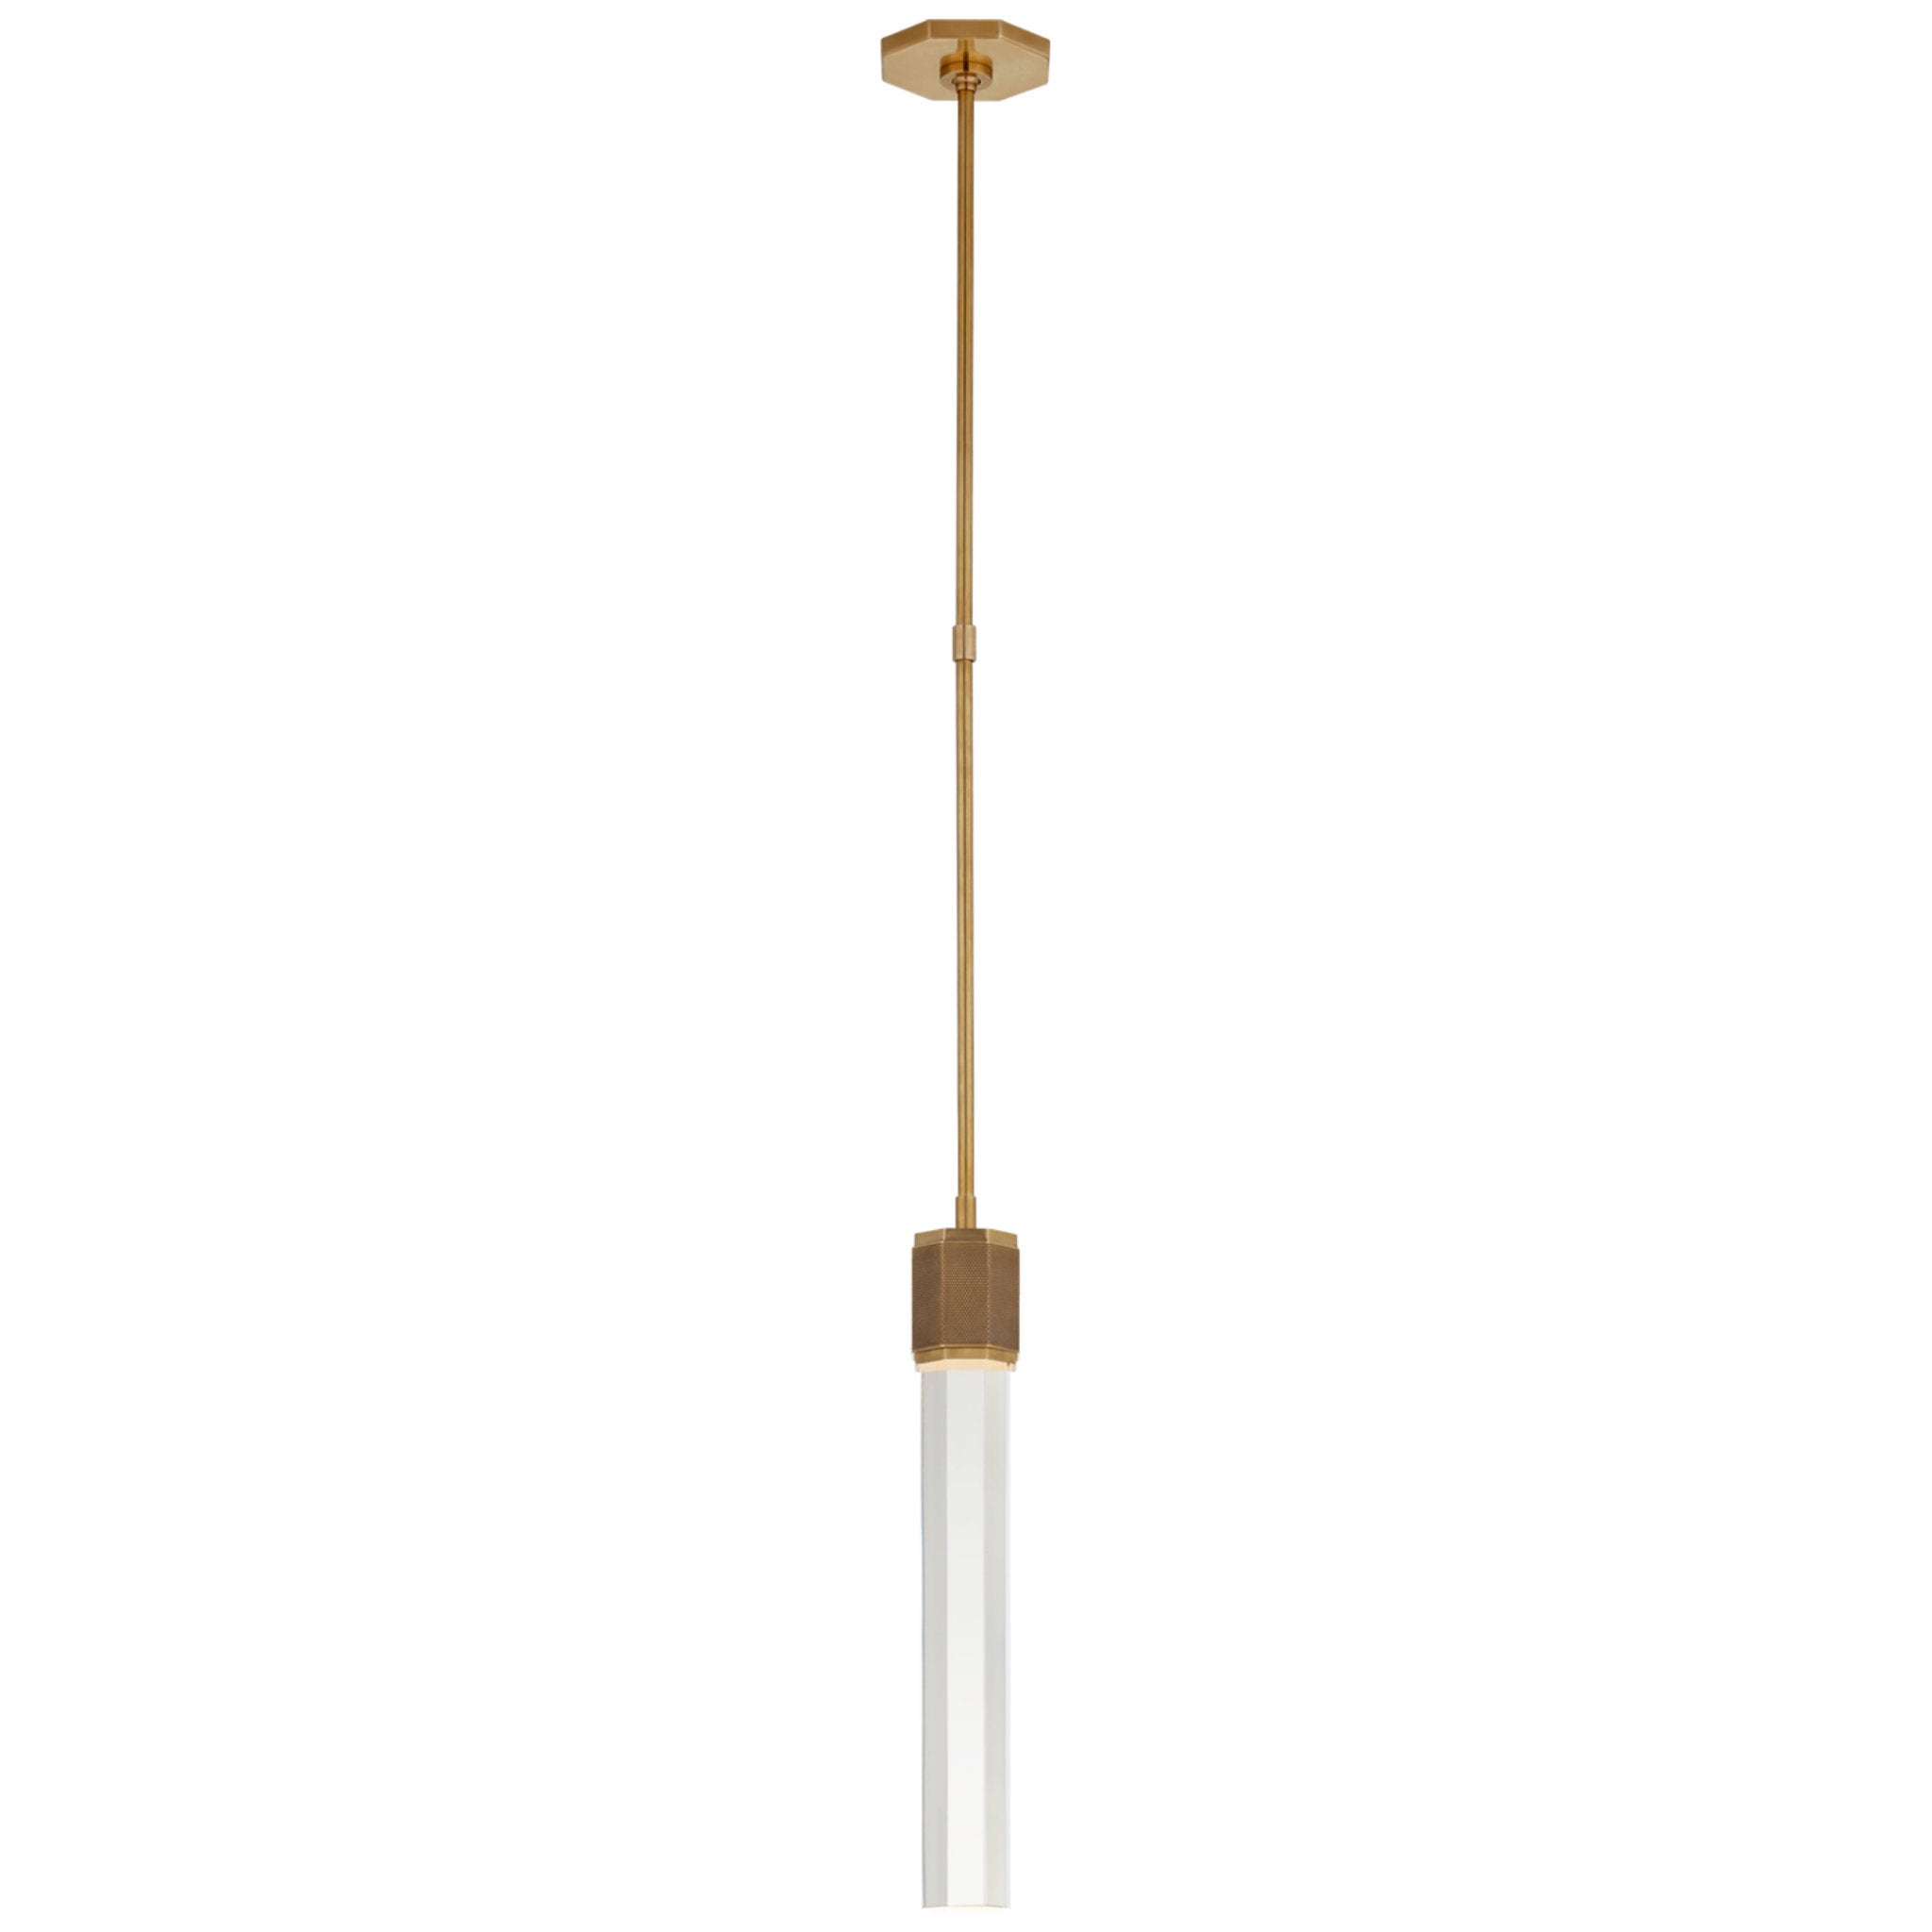 Lauren Rottet Fascio Single Pendant in Hand-Rubbed Antique Brass with Crystal